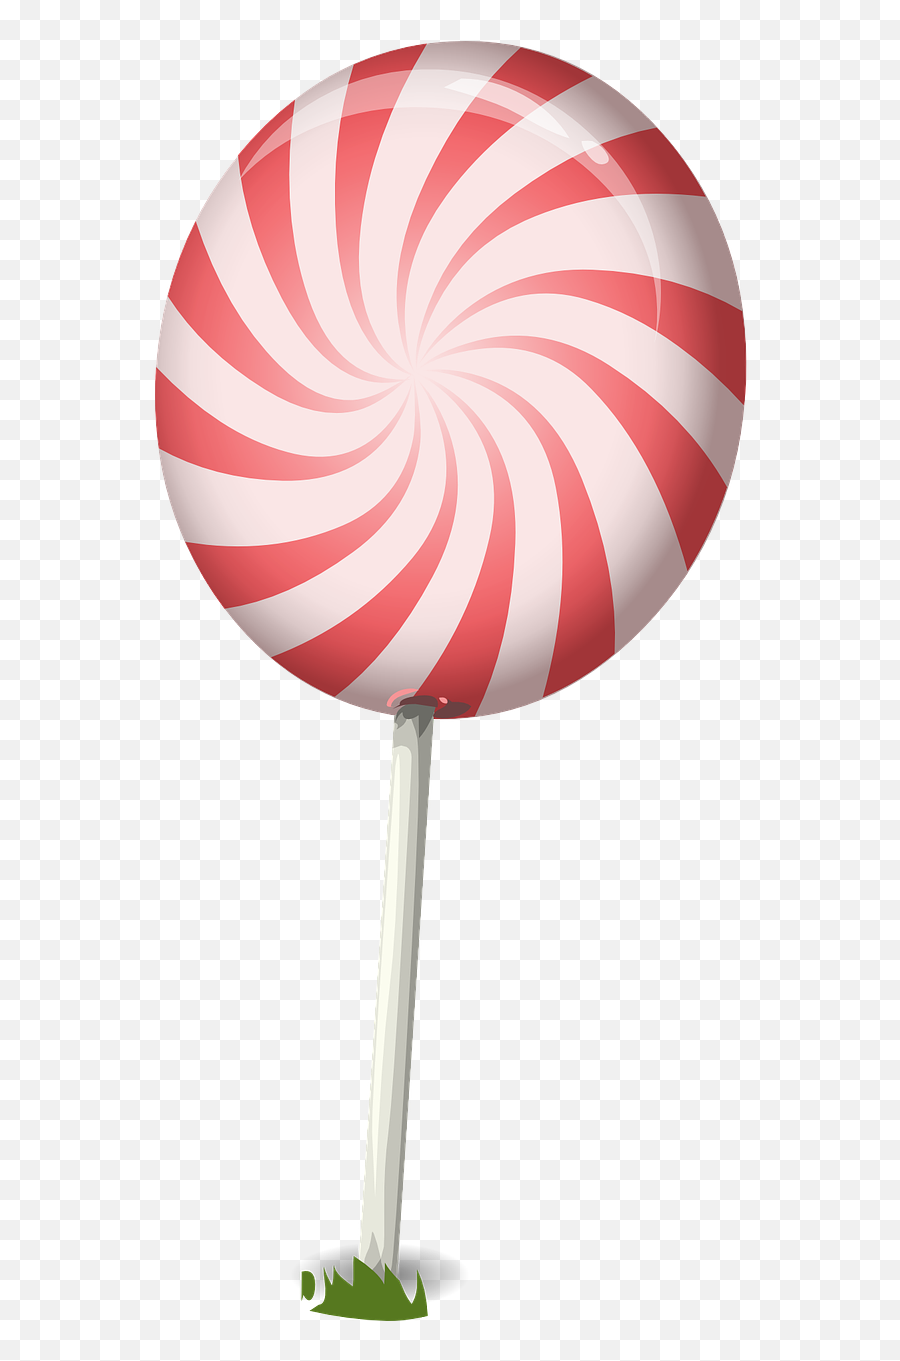 Candy Lollipop Sweets Png Picpng - Candy Emoji,Candy Png